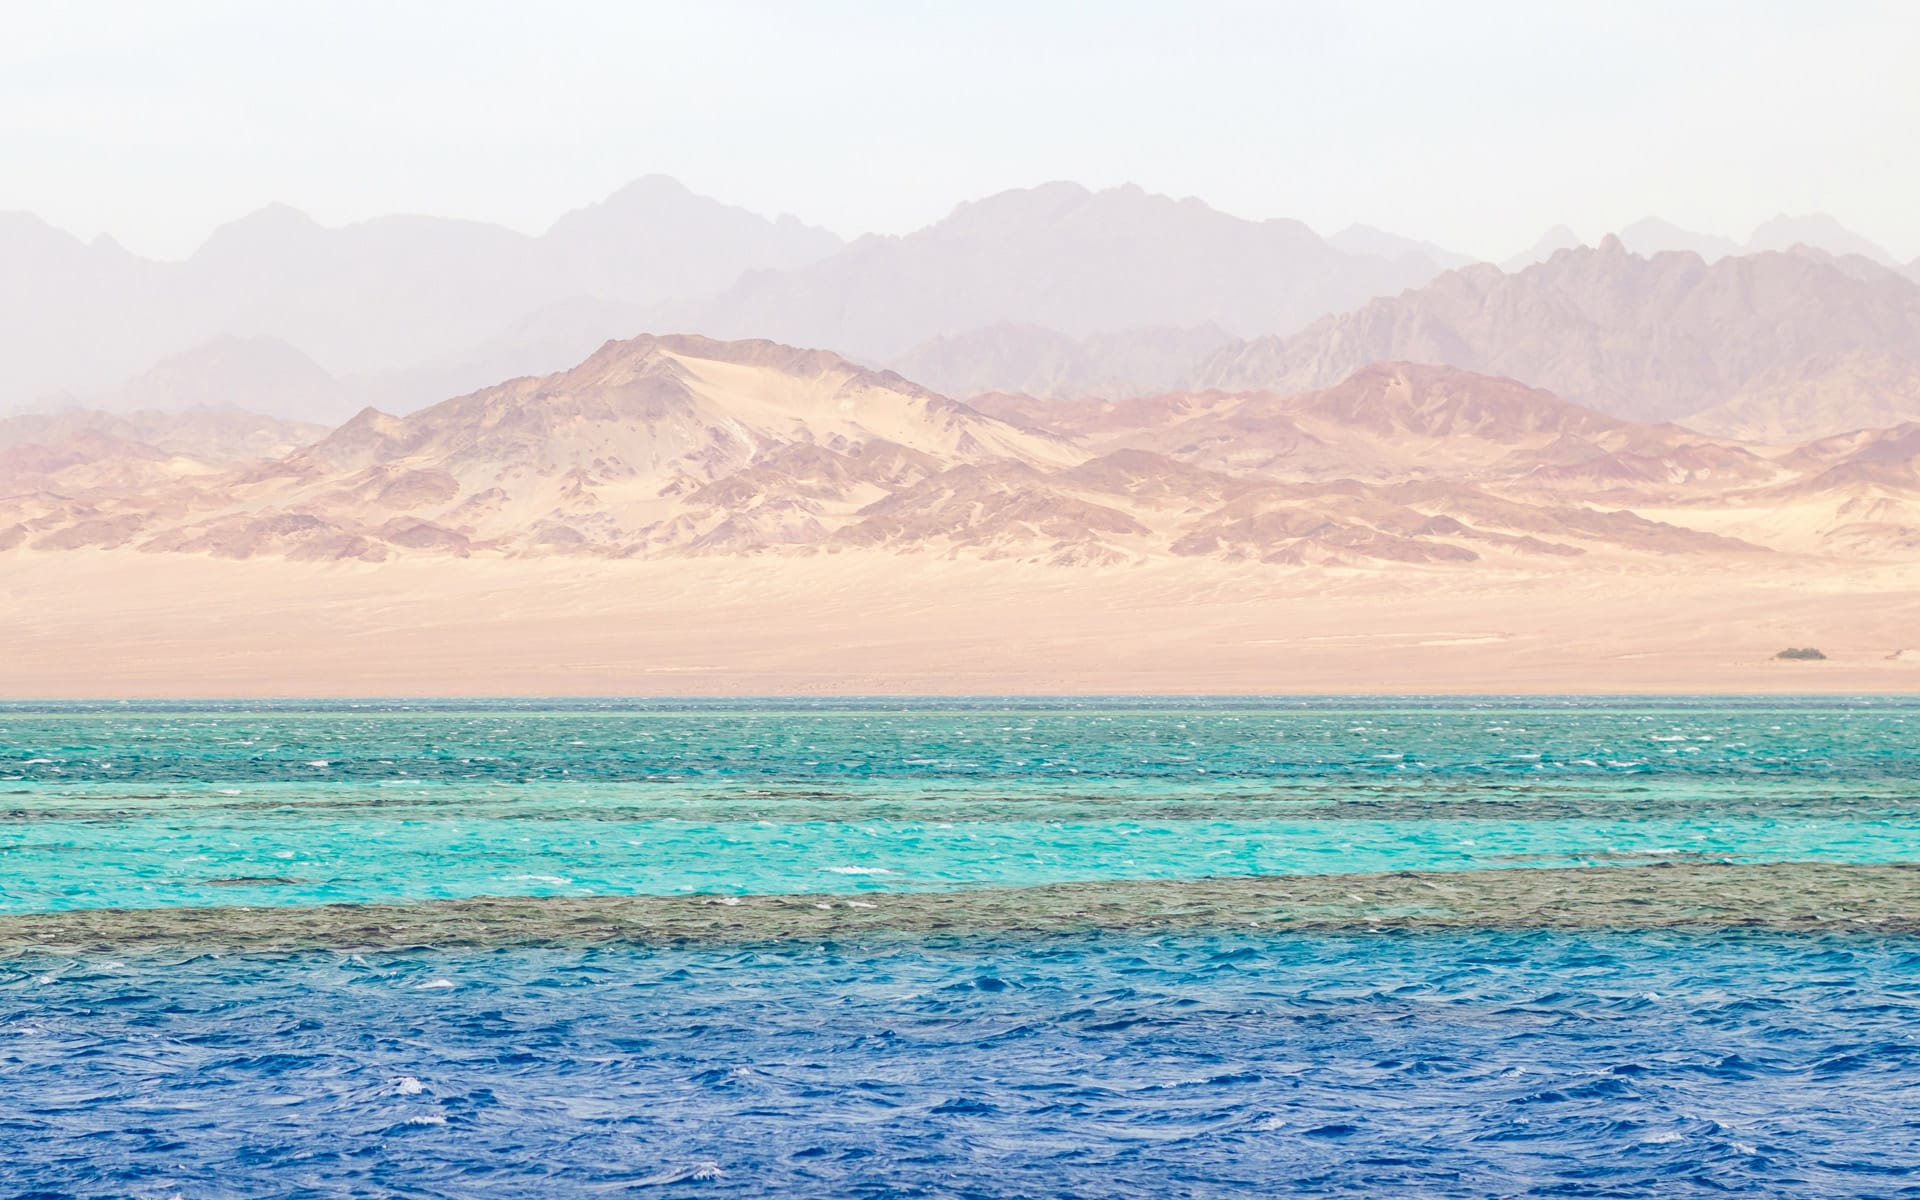 Sinai and the Red Sea